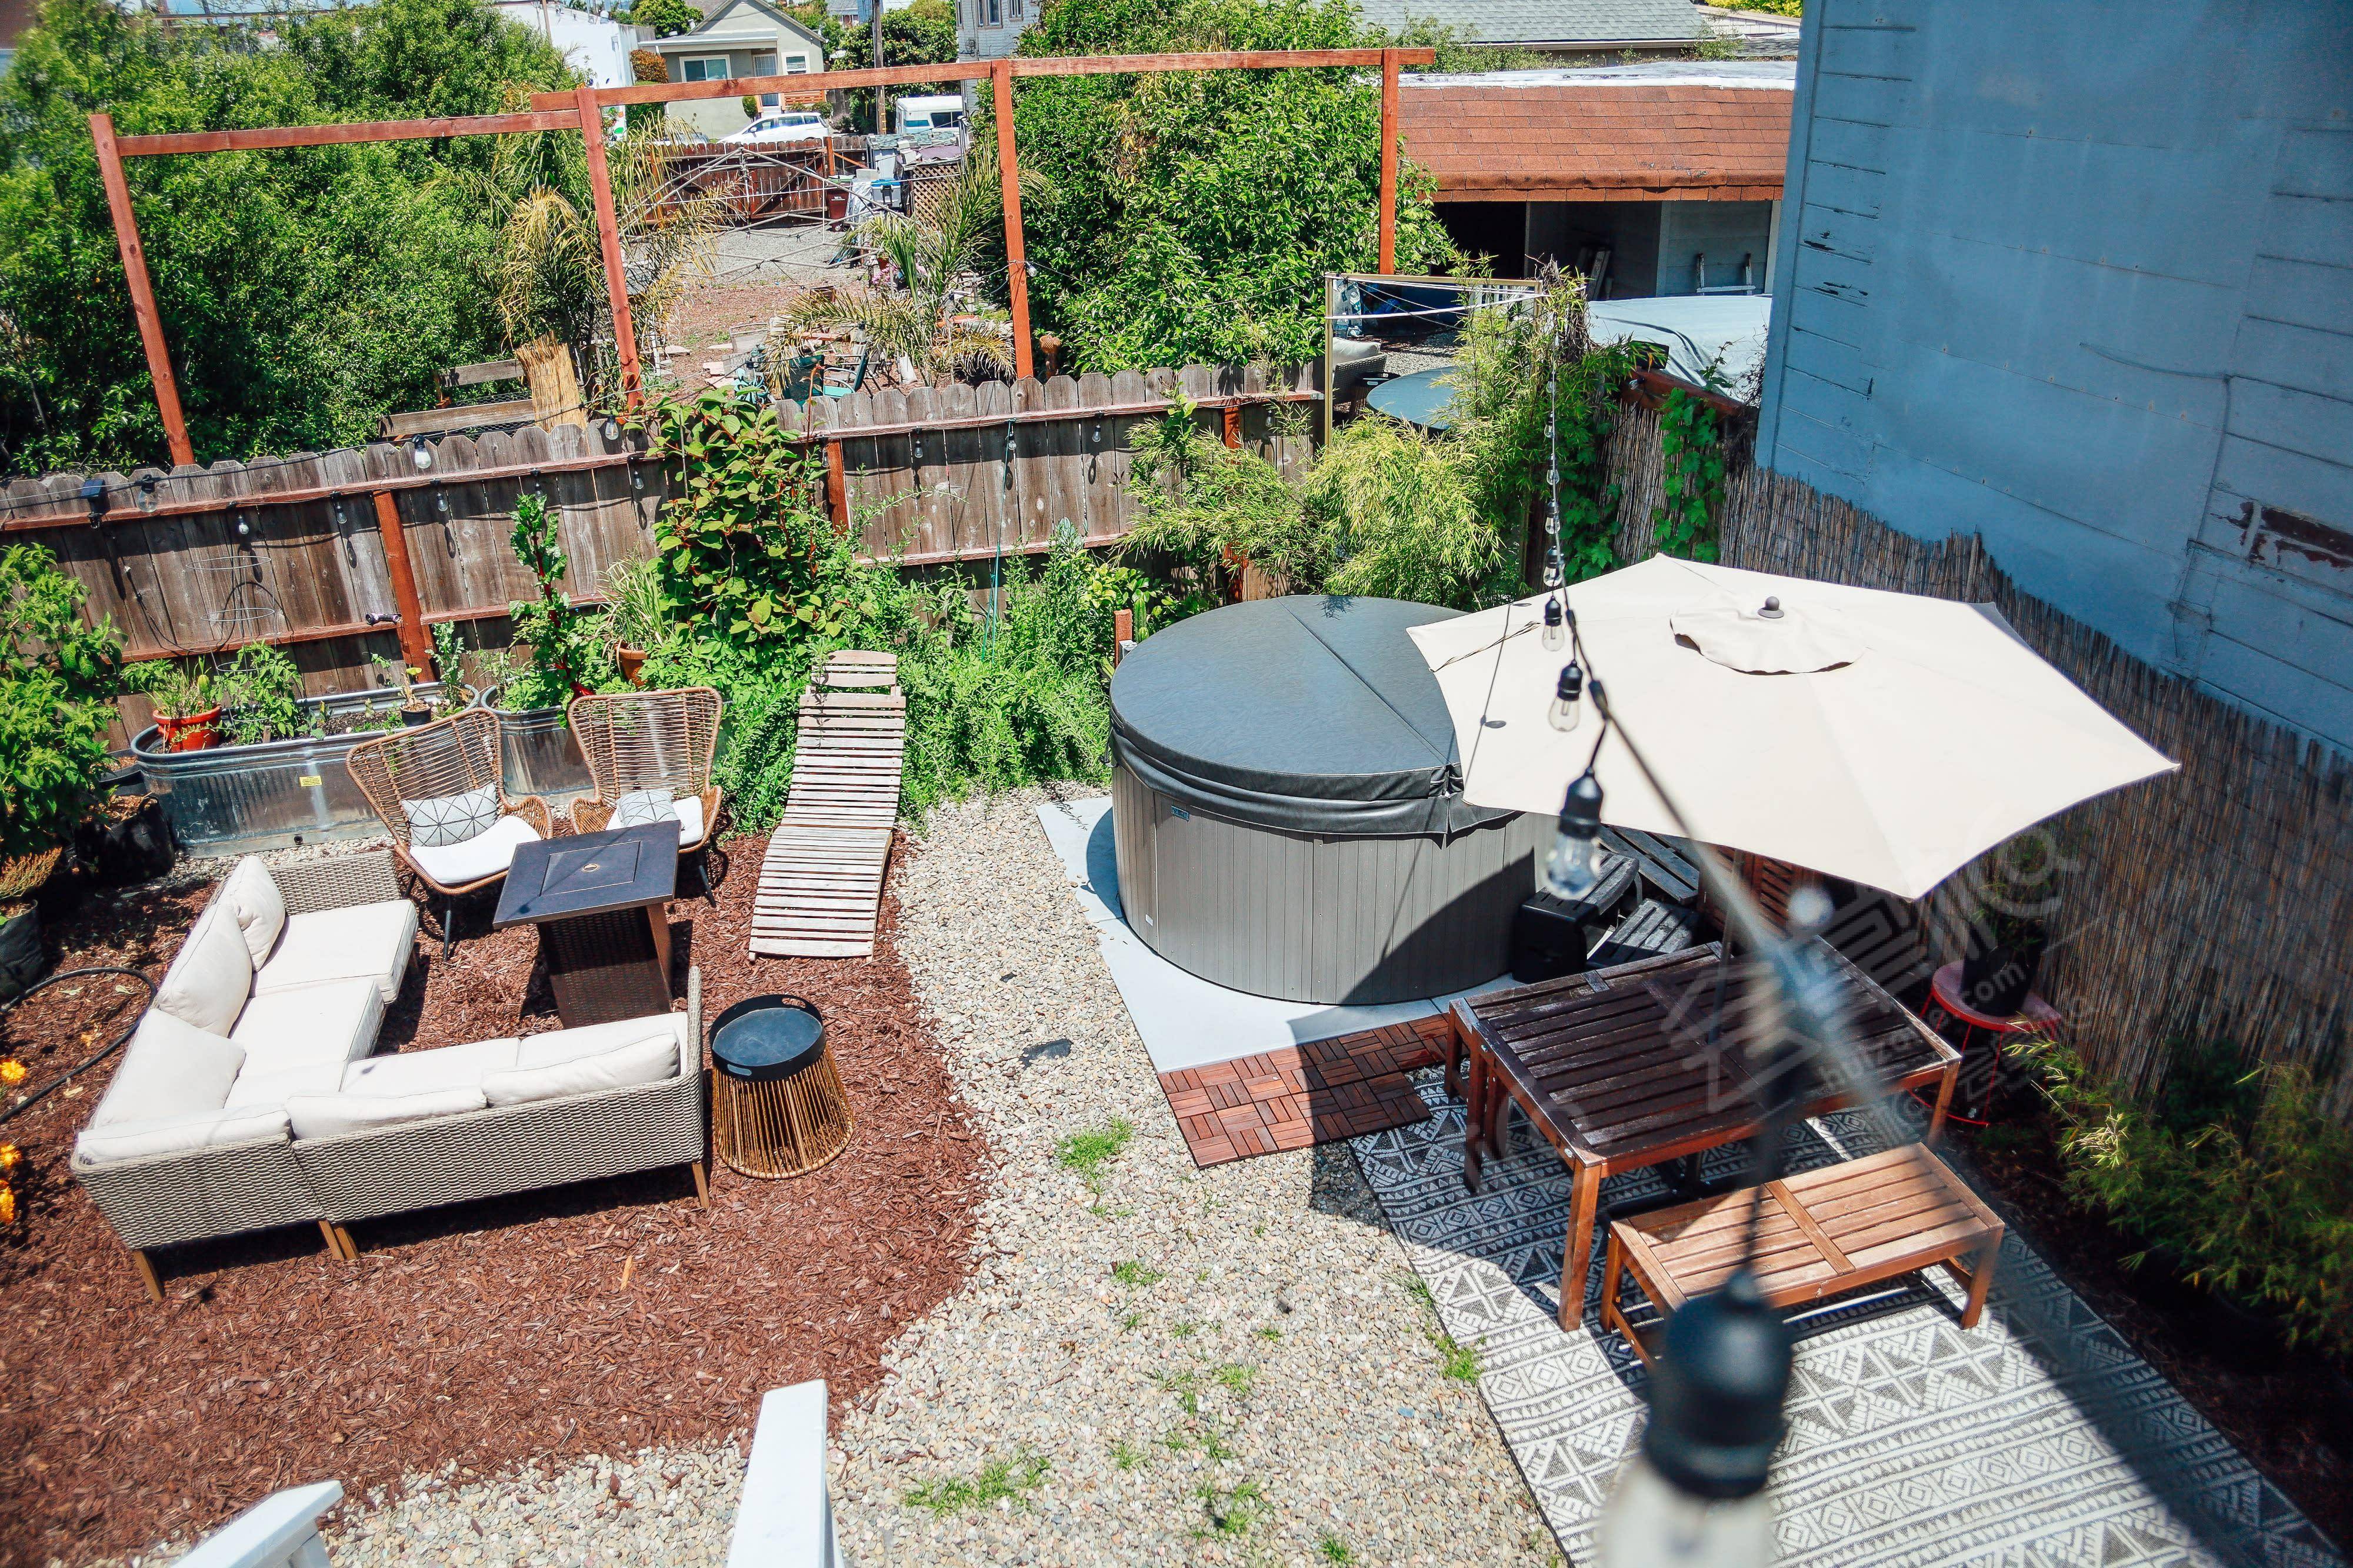 Modern Urban Tropical Garden, Hot Tub, Outdoor Shower, Fire Pit, Photography Space, Meetings, WiFi